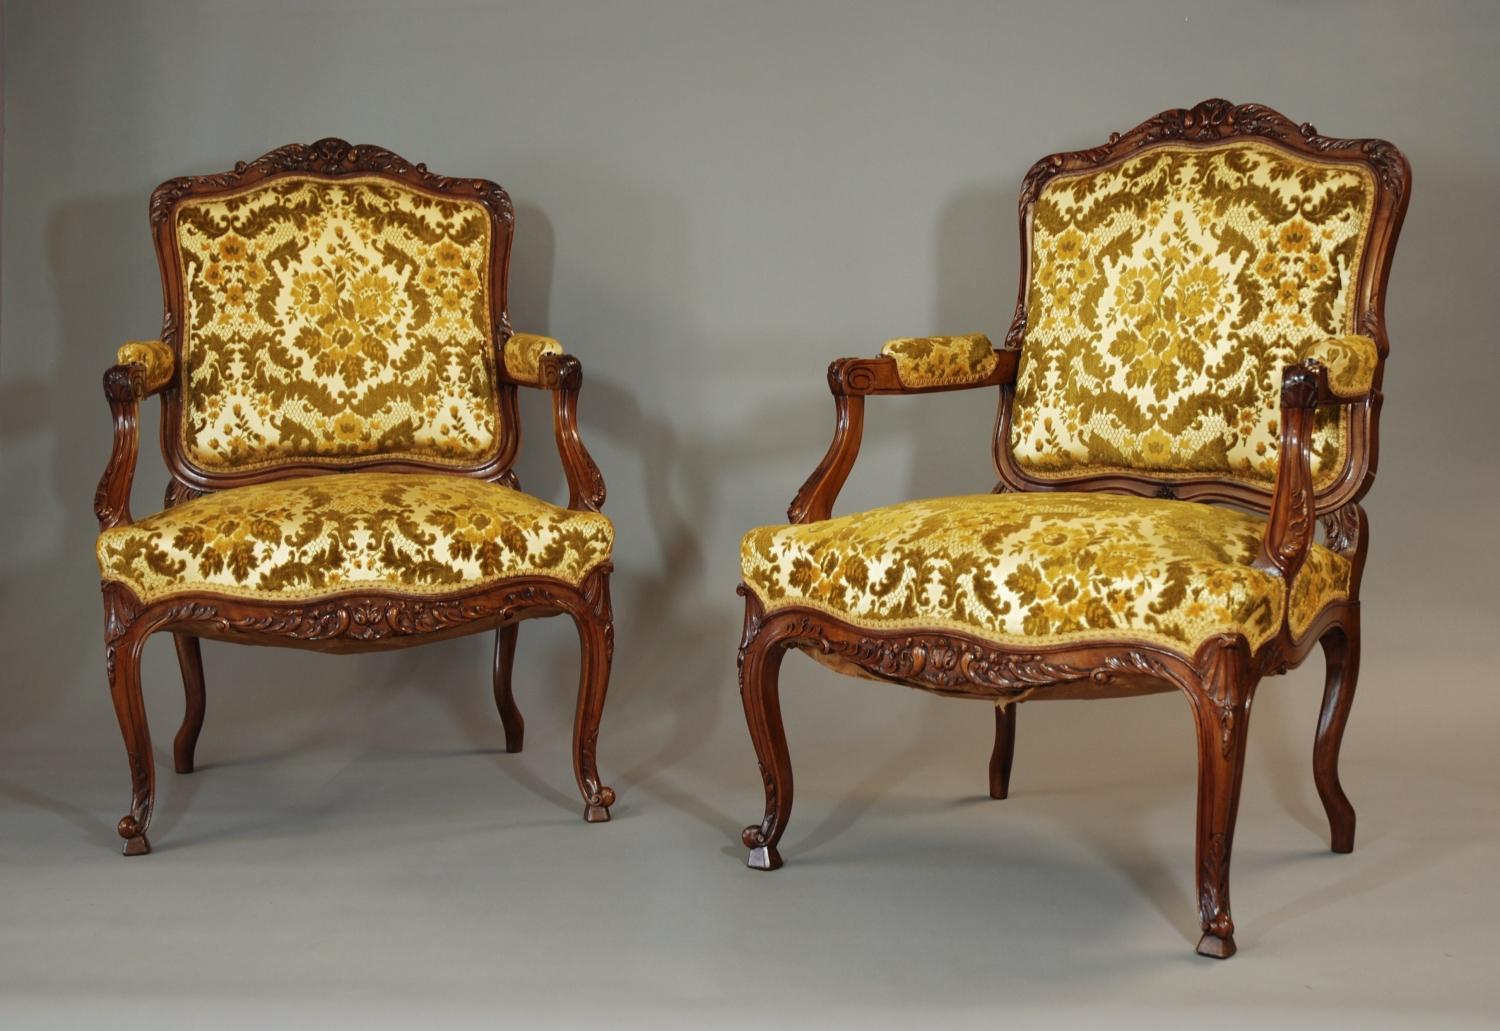 Pair of French late 19thc walnut fauteuils